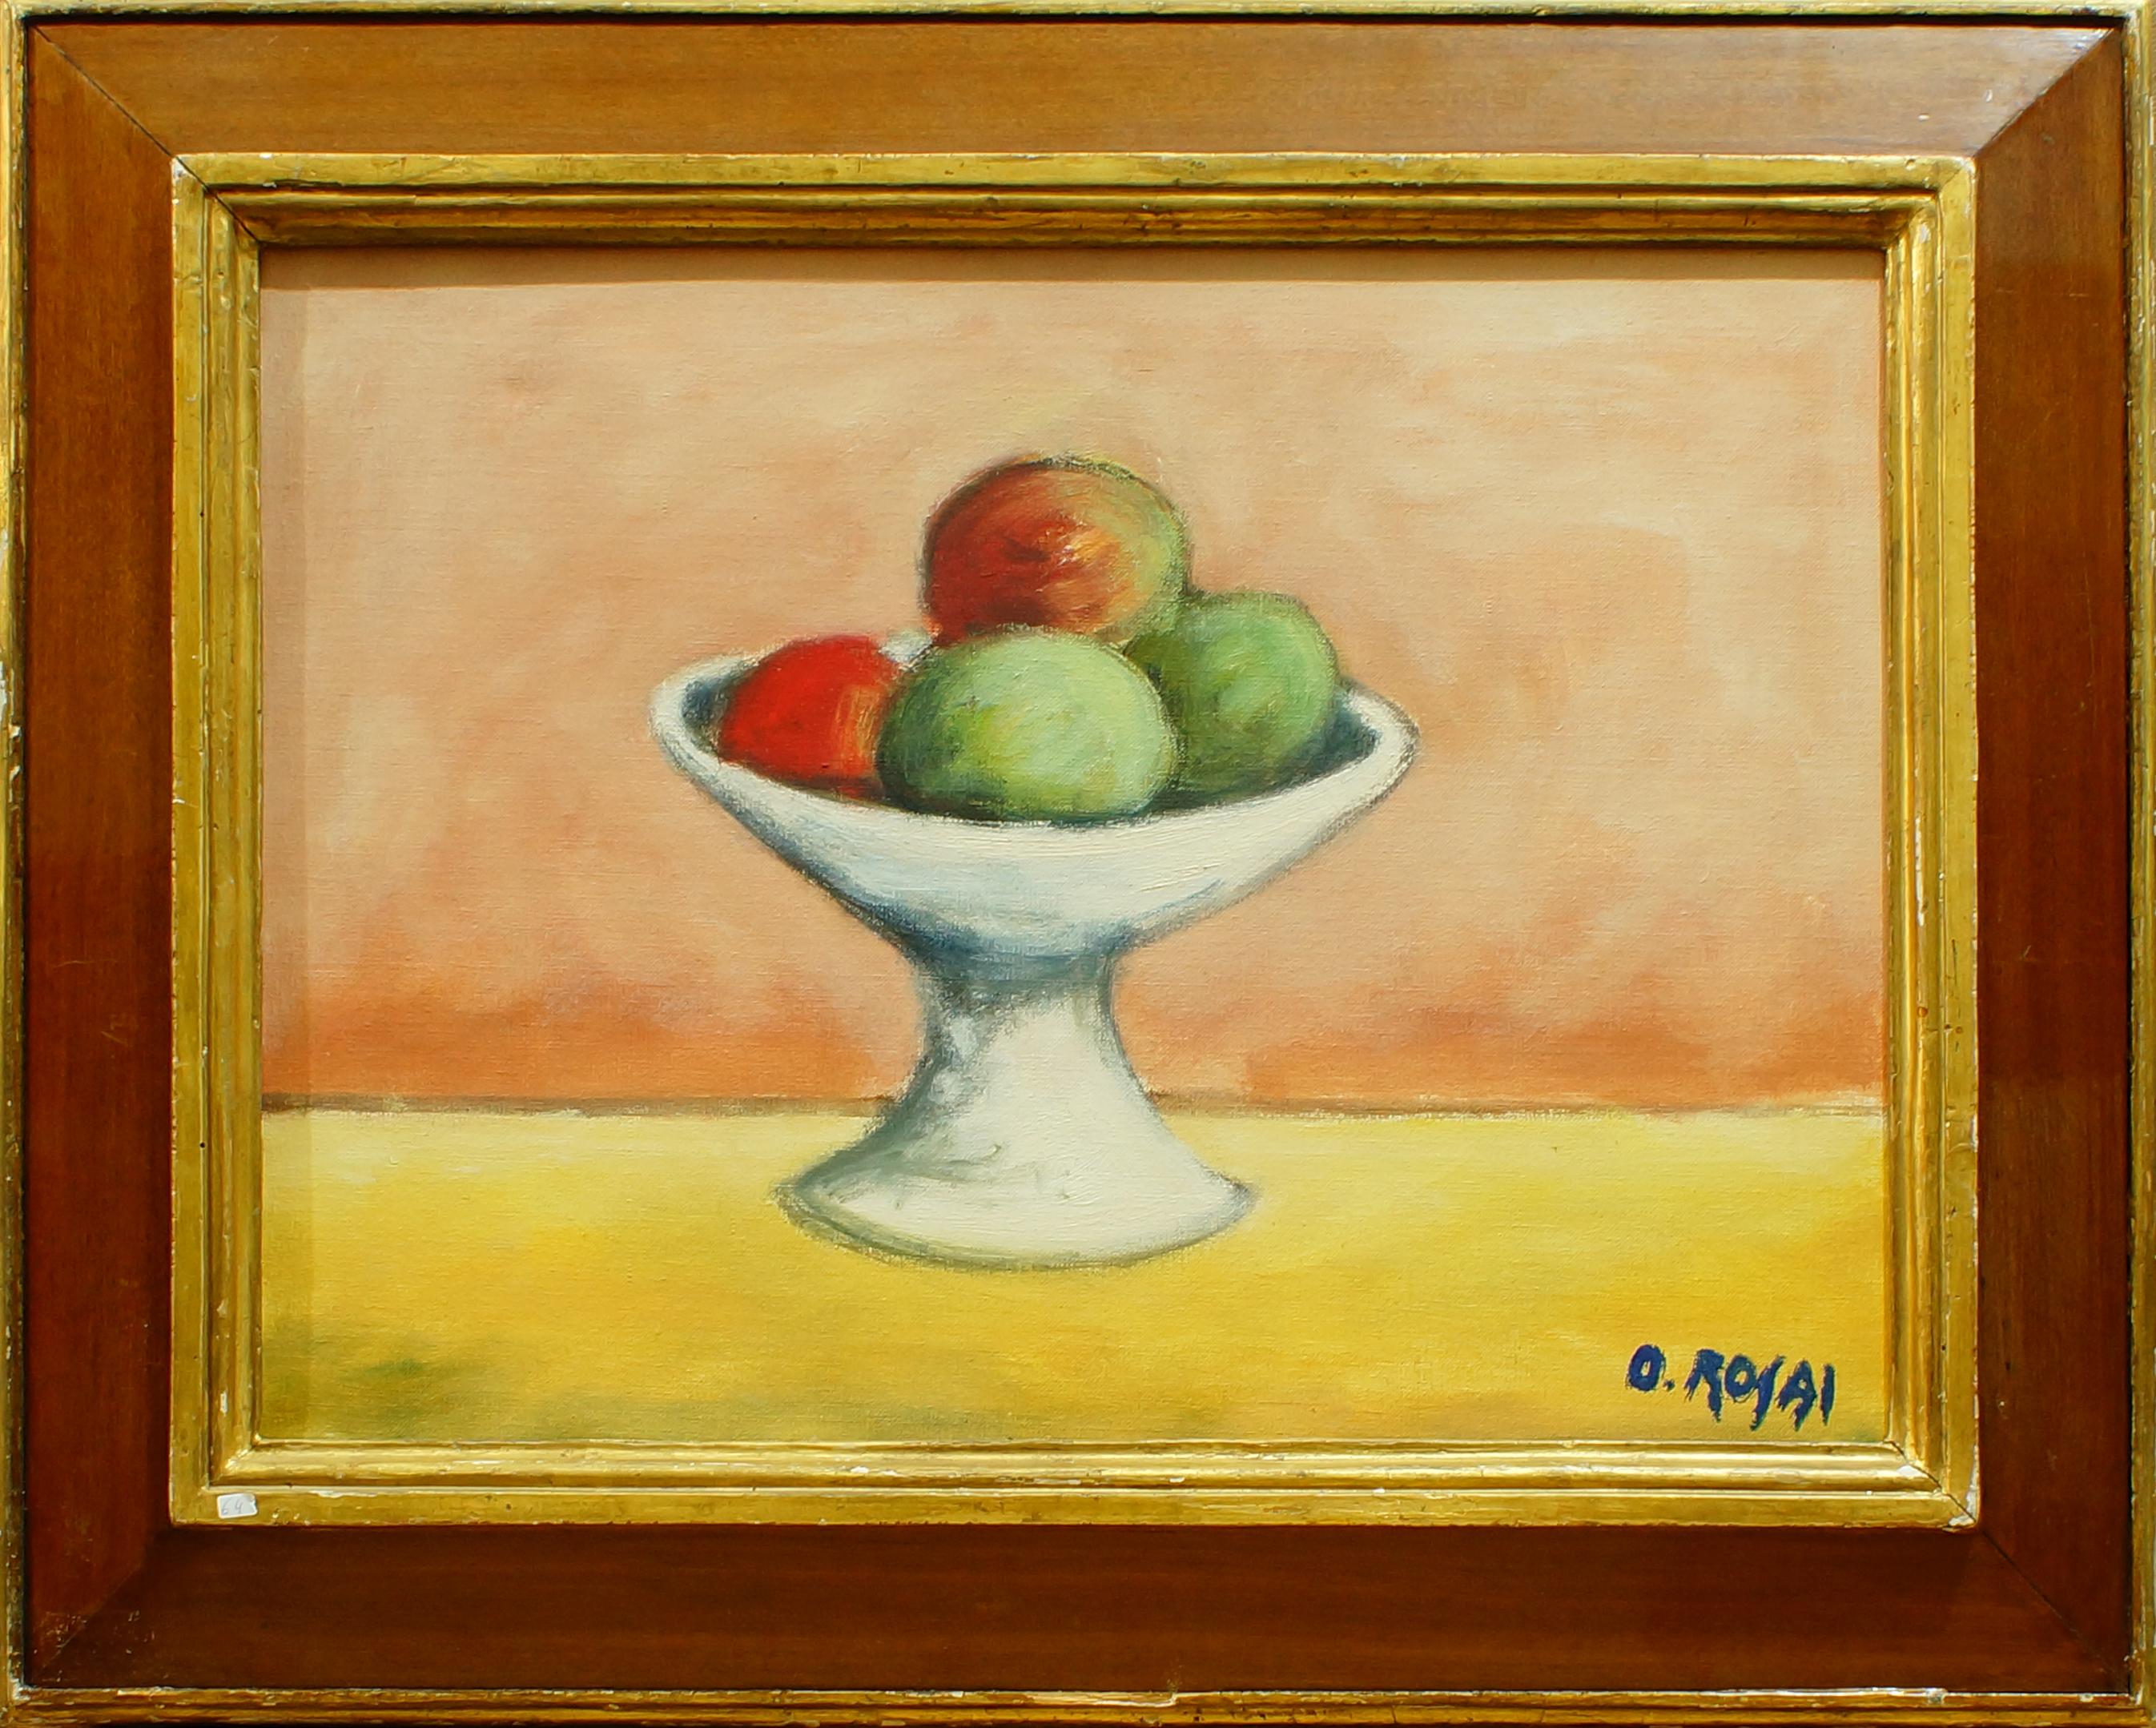 Still Life with Fruits - Oil on Canvas by Ottone Rosai - 1950 ca.